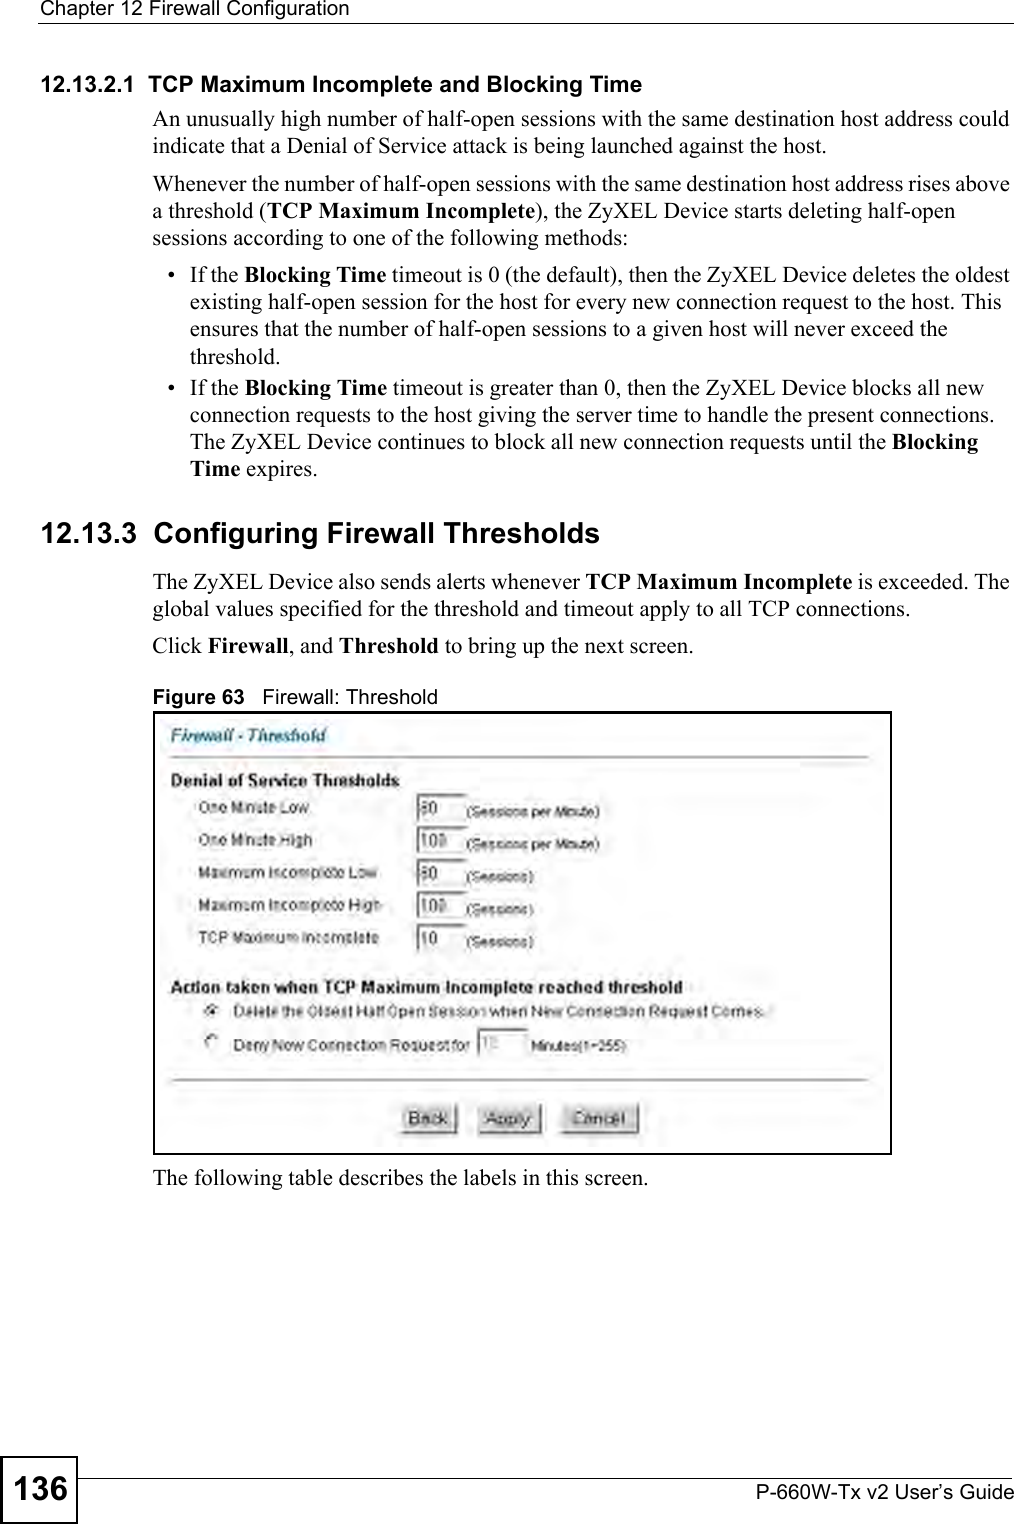 Chapter 12 Firewall ConfigurationP-660W-Tx v2 User’s Guide13612.13.2.1  TCP Maximum Incomplete and Blocking TimeAn unusually high number of half-open sessions with the same destination host address could indicate that a Denial of Service attack is being launched against the host. Whenever the number of half-open sessions with the same destination host address rises above a threshold (TCP Maximum Incomplete), the ZyXEL Device starts deleting half-open sessions according to one of the following methods:• If the Blocking Time timeout is 0 (the default), then the ZyXEL Device deletes the oldest existing half-open session for the host for every new connection request to the host. This ensures that the number of half-open sessions to a given host will never exceed the threshold. • If the Blocking Time timeout is greater than 0, then the ZyXEL Device blocks all new connection requests to the host giving the server time to handle the present connections. The ZyXEL Device continues to block all new connection requests until the Blocking Time expires. 12.13.3  Configuring Firewall Thresholds The ZyXEL Device also sends alerts whenever TCP Maximum Incomplete is exceeded. The global values specified for the threshold and timeout apply to all TCP connections. Click Firewall, and Threshold to bring up the next screen.Figure 63   Firewall: ThresholdThe following table describes the labels in this screen.